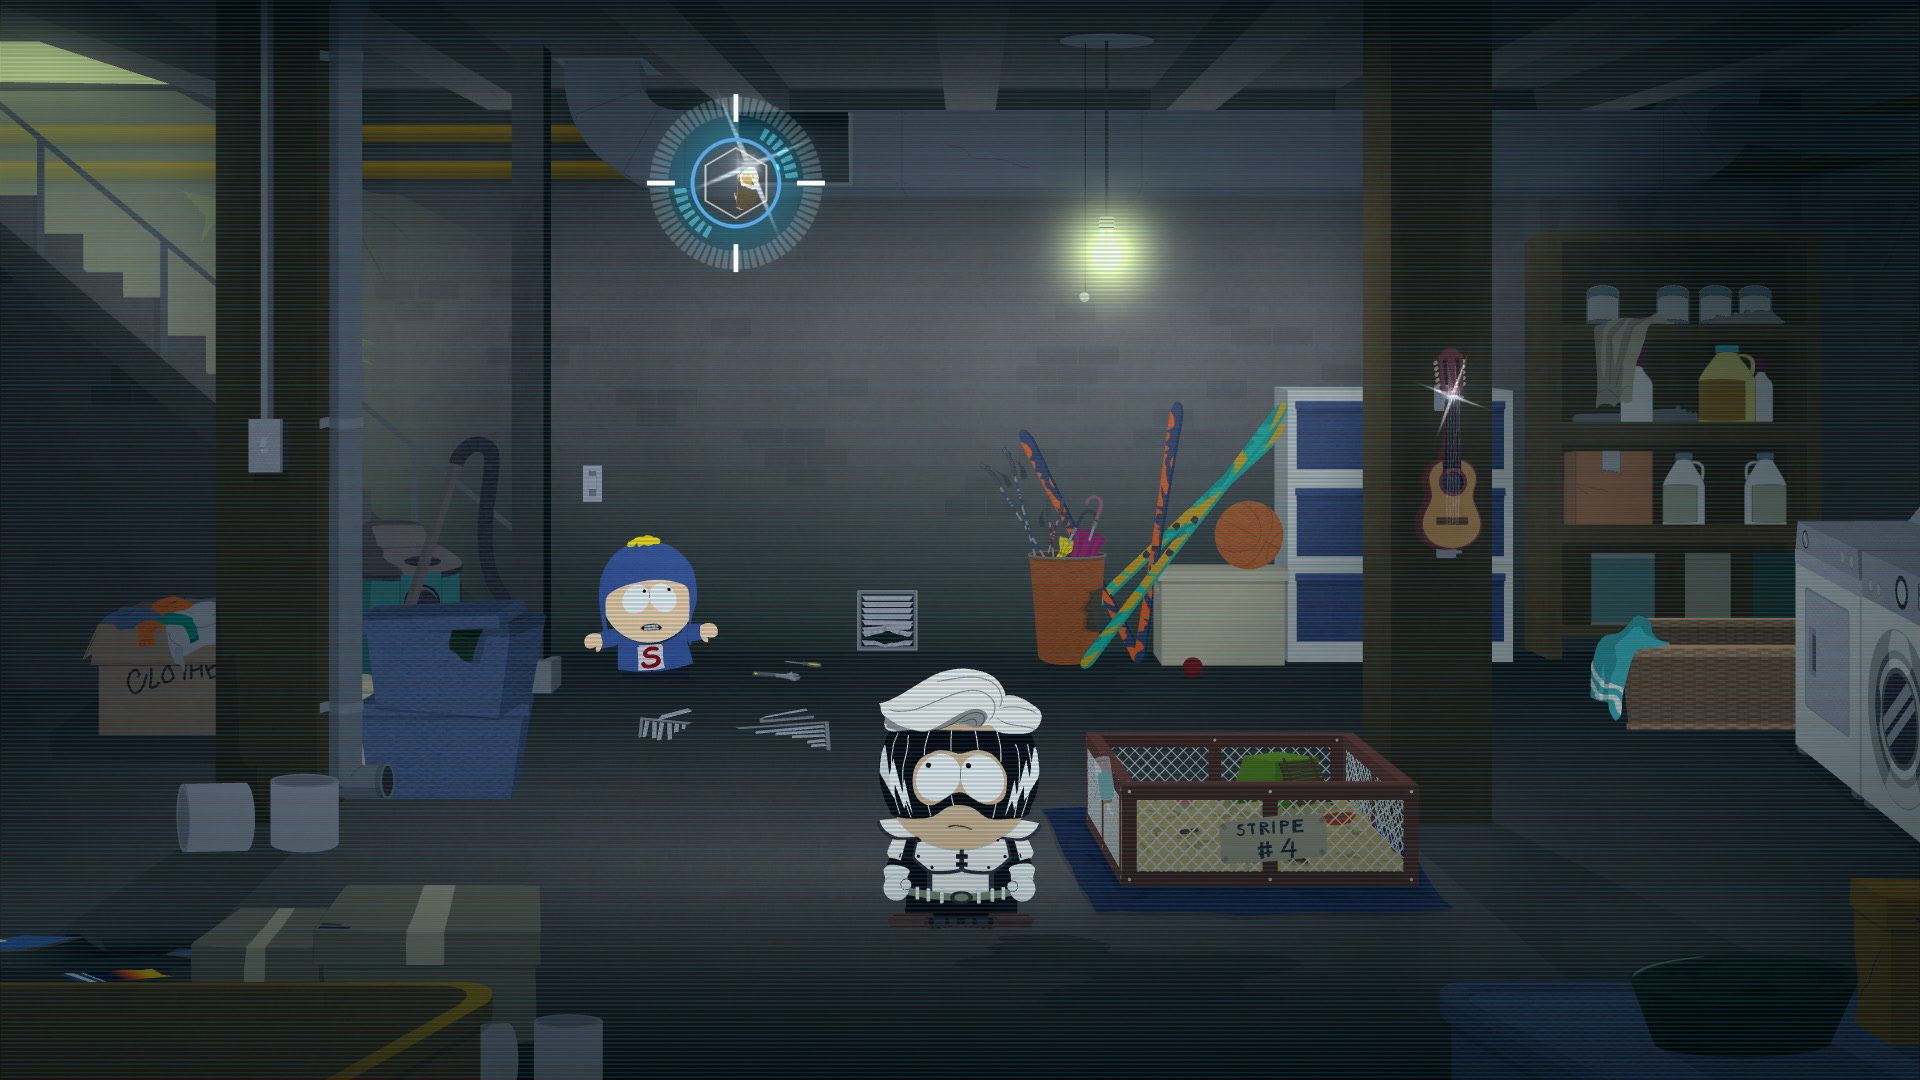 South Park The Fractured But Whole screens image 6